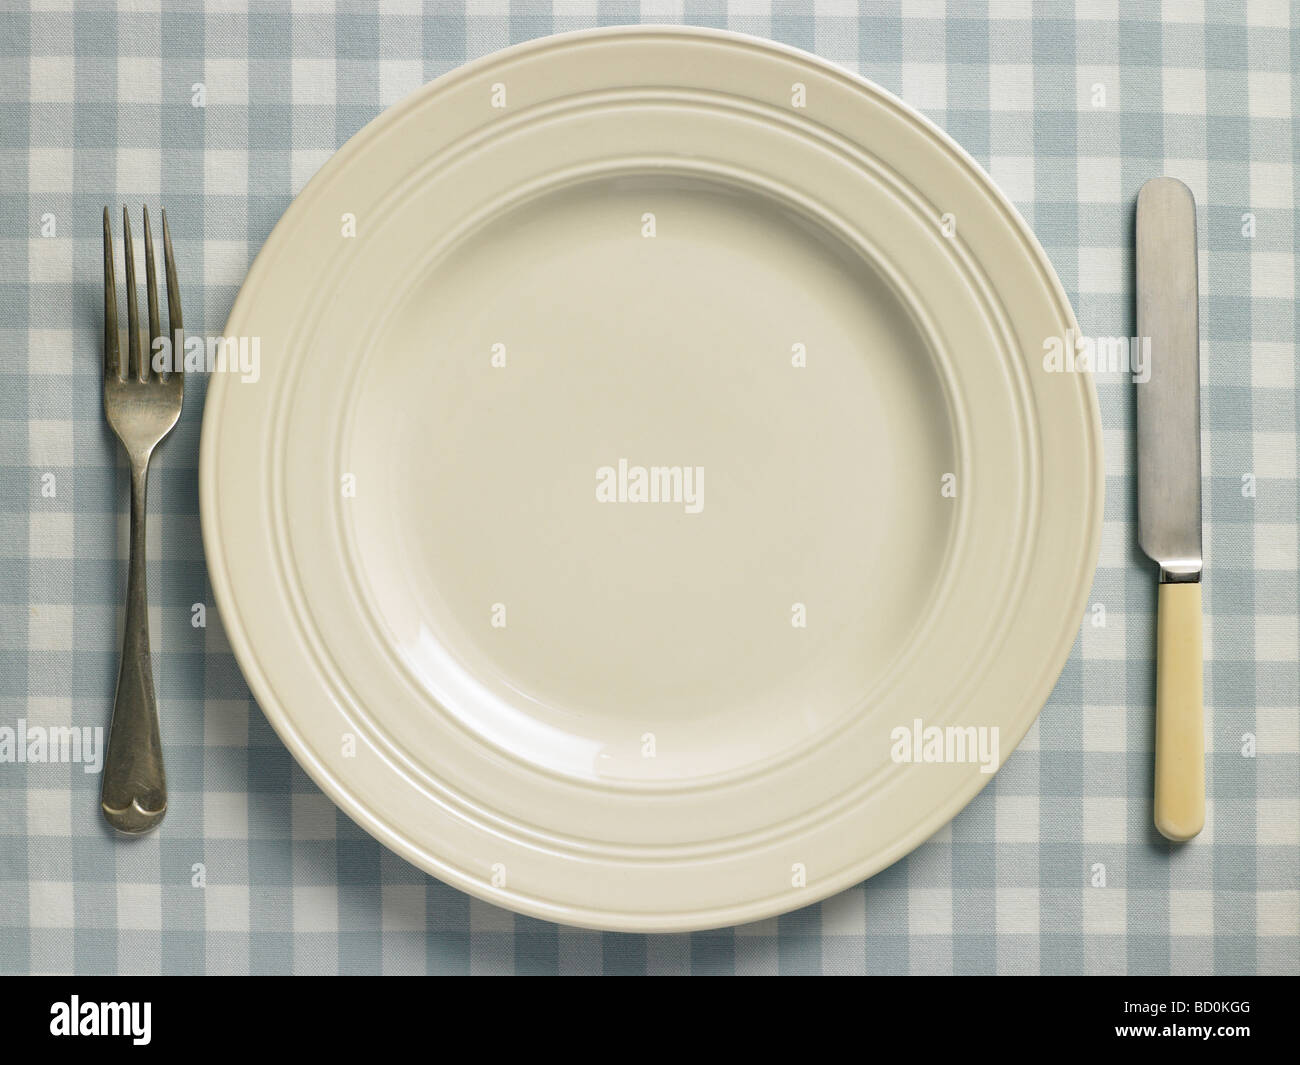 Overhead View Of Place Setting Stock Photo